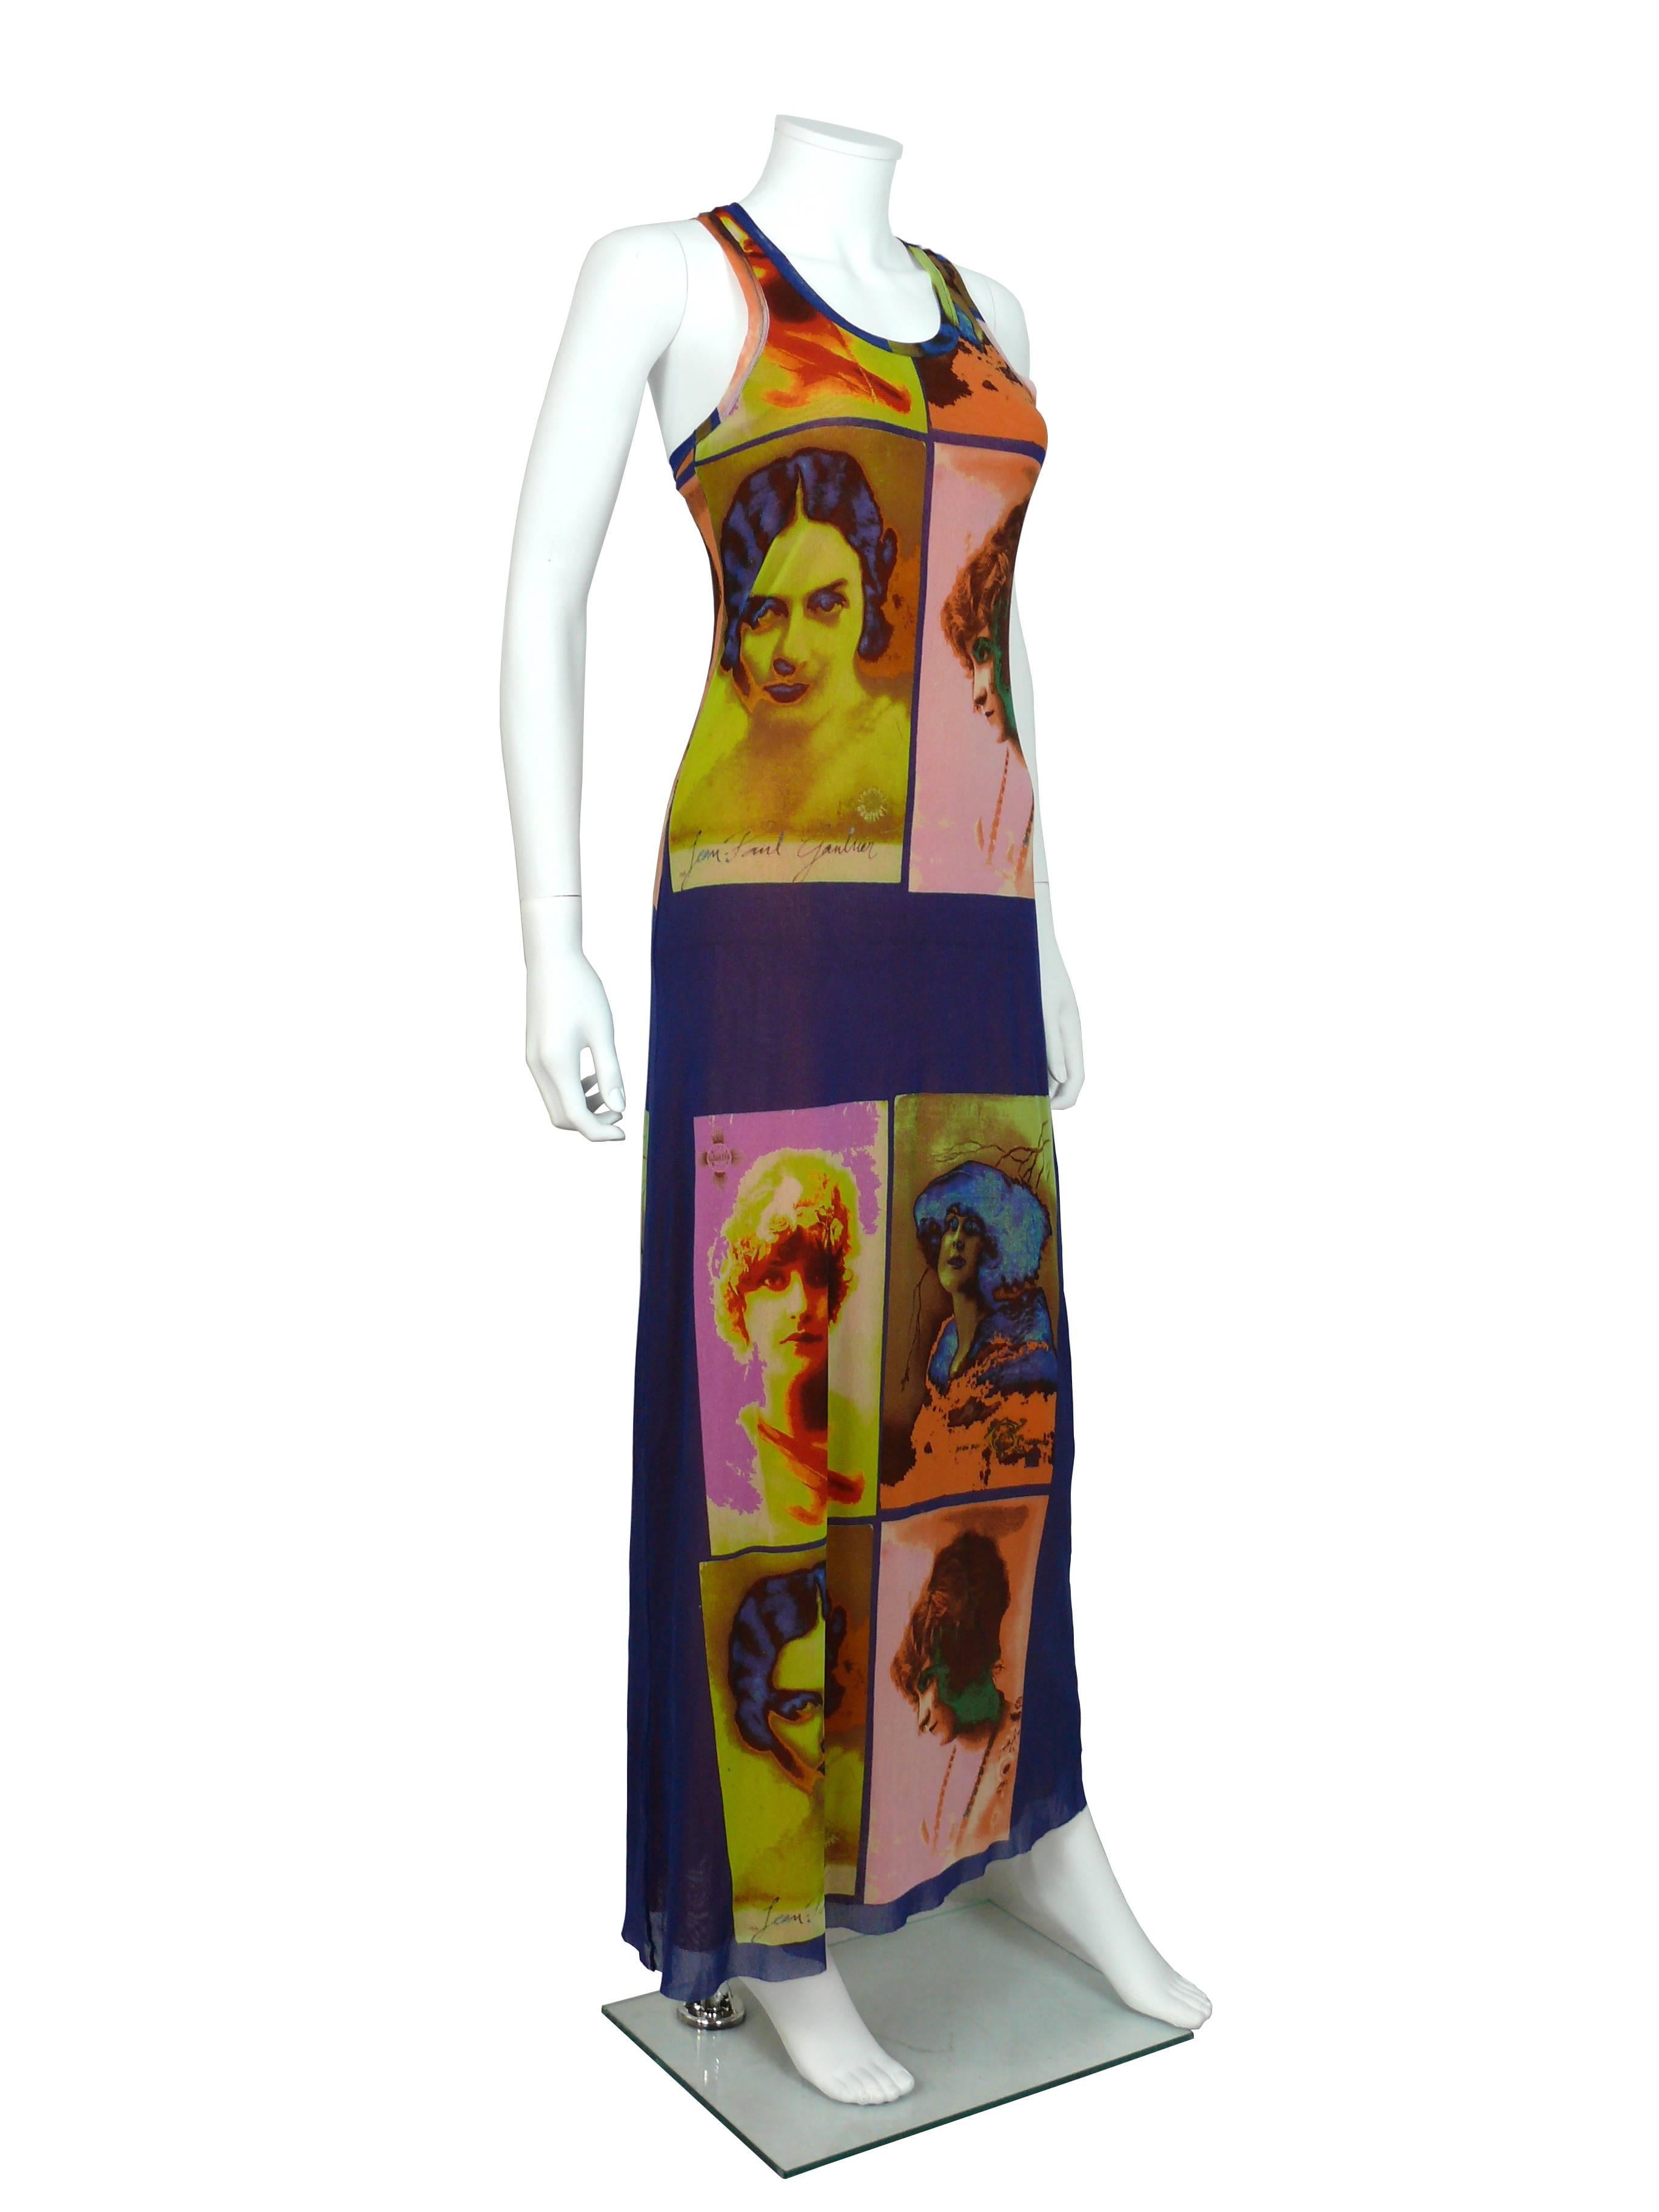 JEAN PAUL GAULTIER vintage portrait photo print Fuzzi mesh stretchy maxi dress.

Label reads JEAN PAUL GAULTIER Soleil.

Size label missing.
Please refer to measurements.

Composition label reads : 100 % nylon.
FUZZI S.p.a Made in Italy.

Indicative